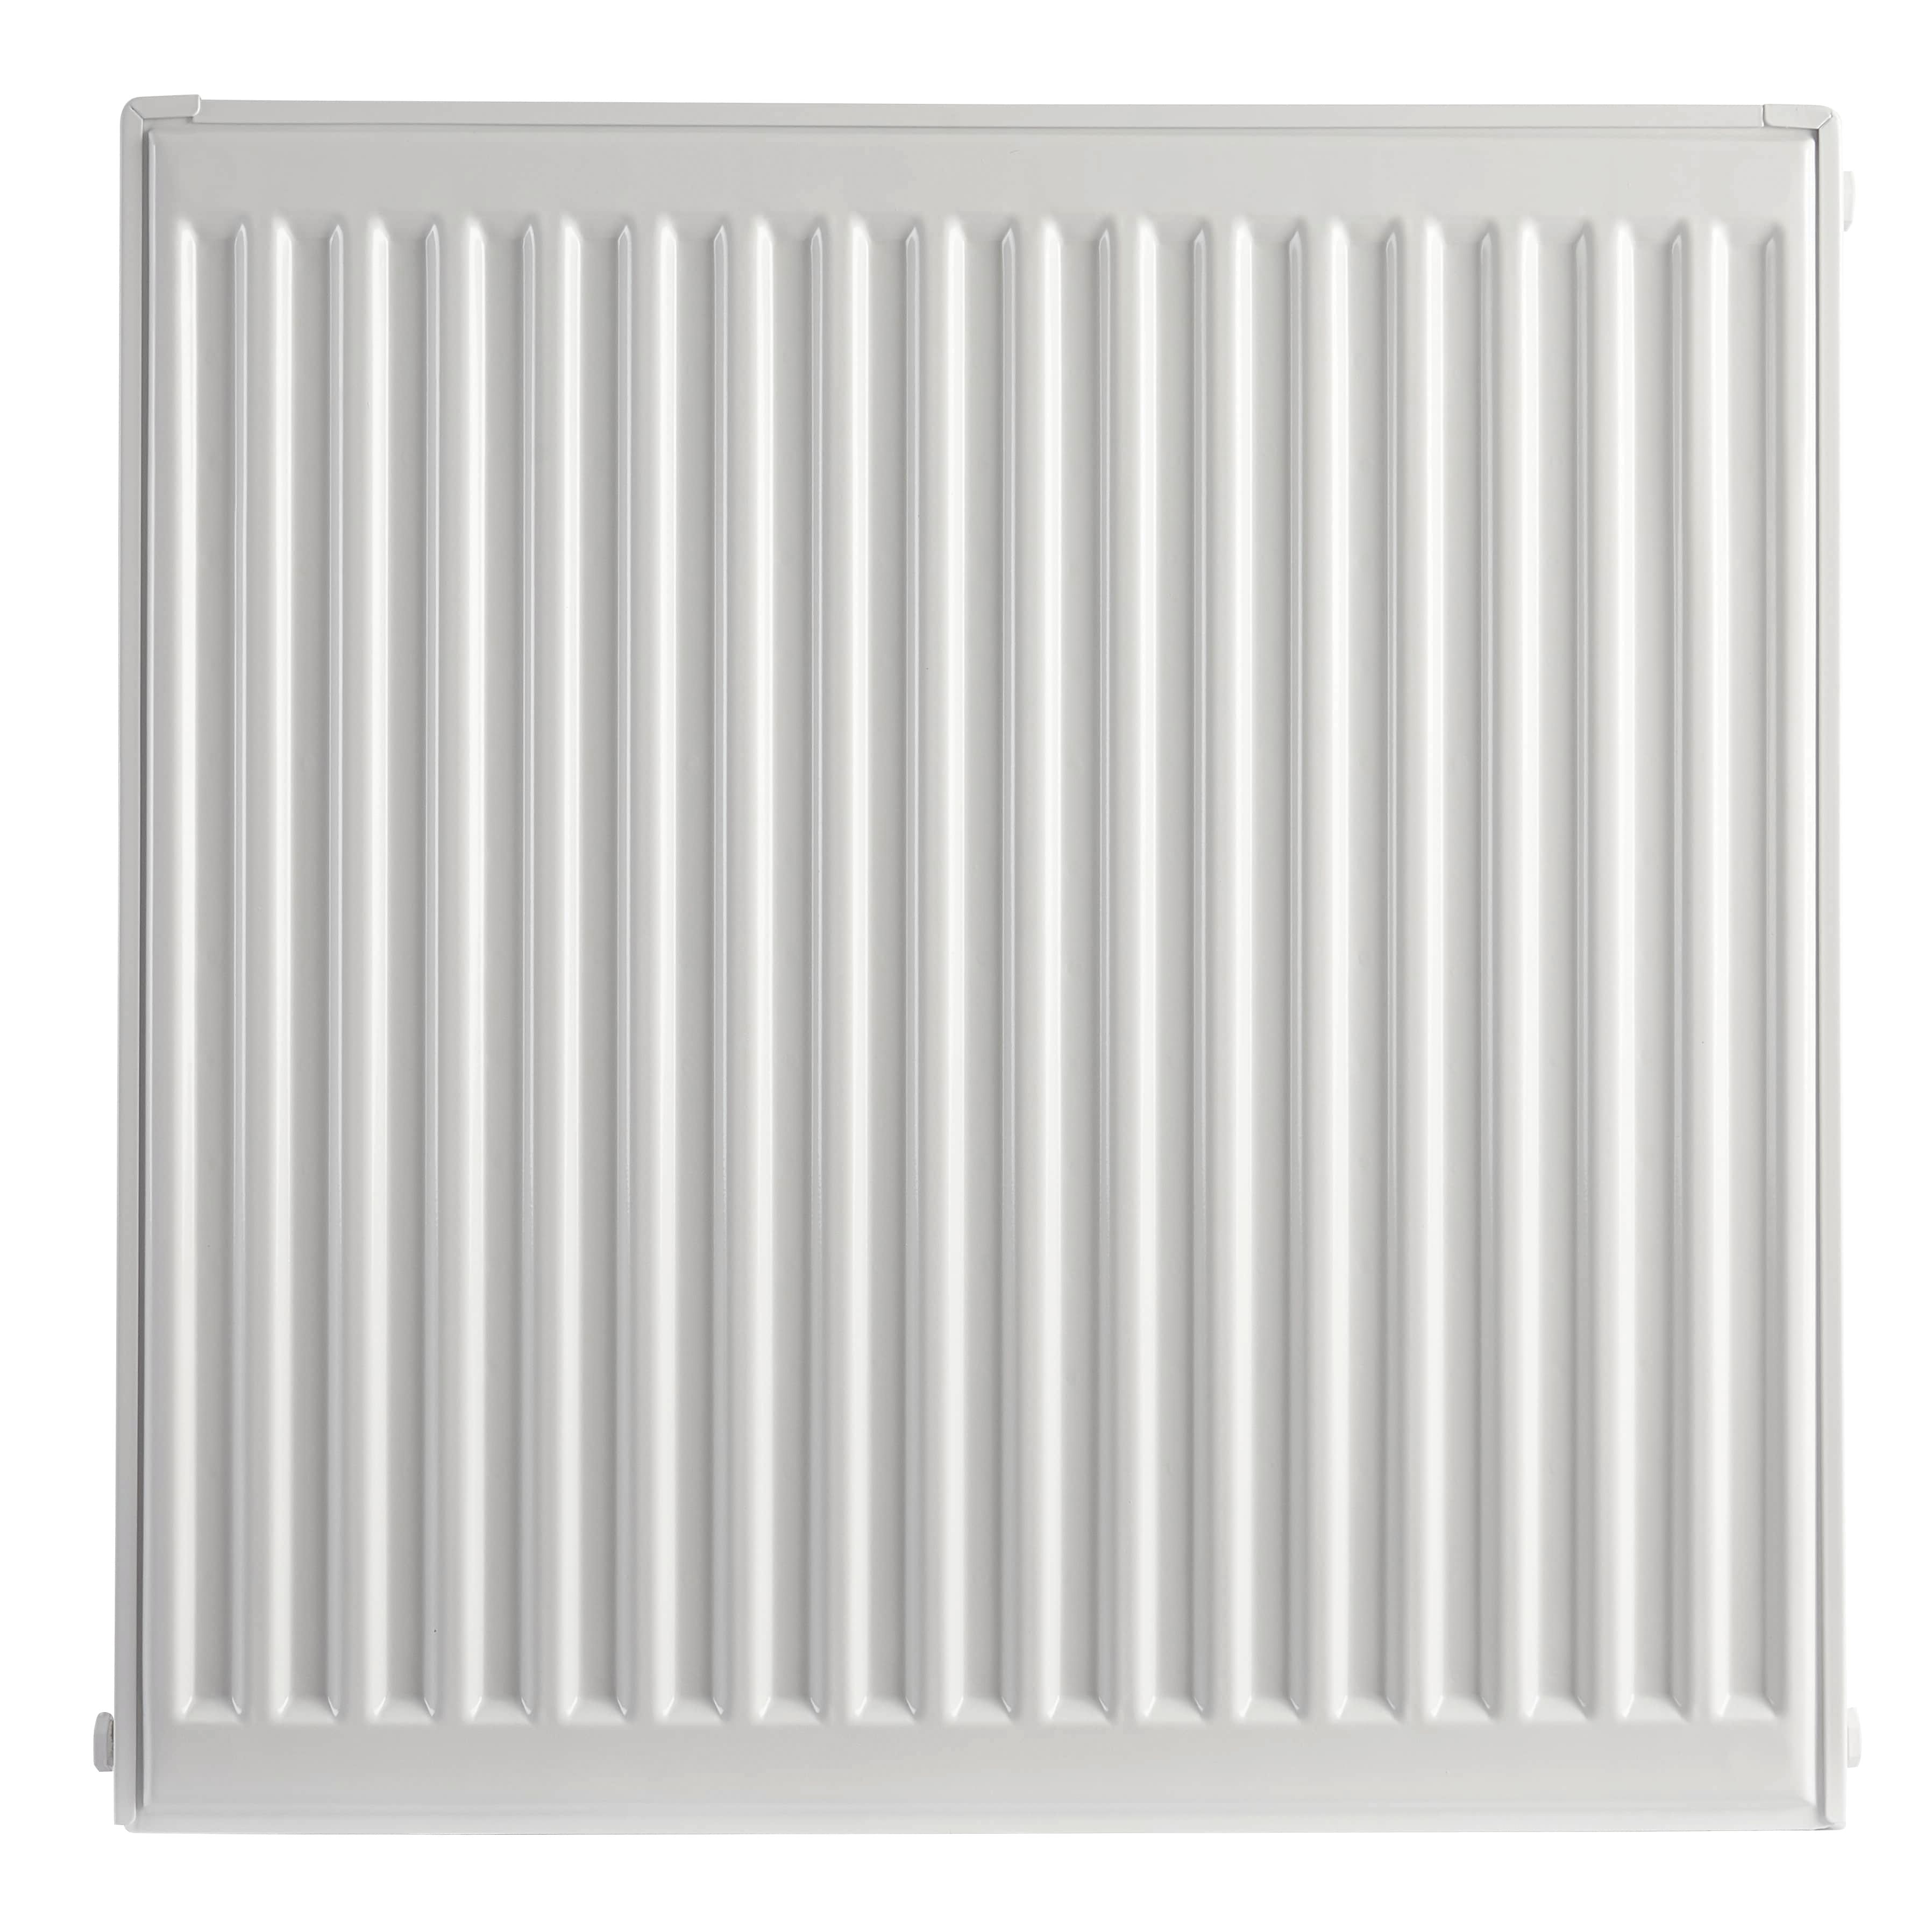 Image of Homeline by Stelrad 700 x 600mm Type 11 Single Panel Single Convector Radiator